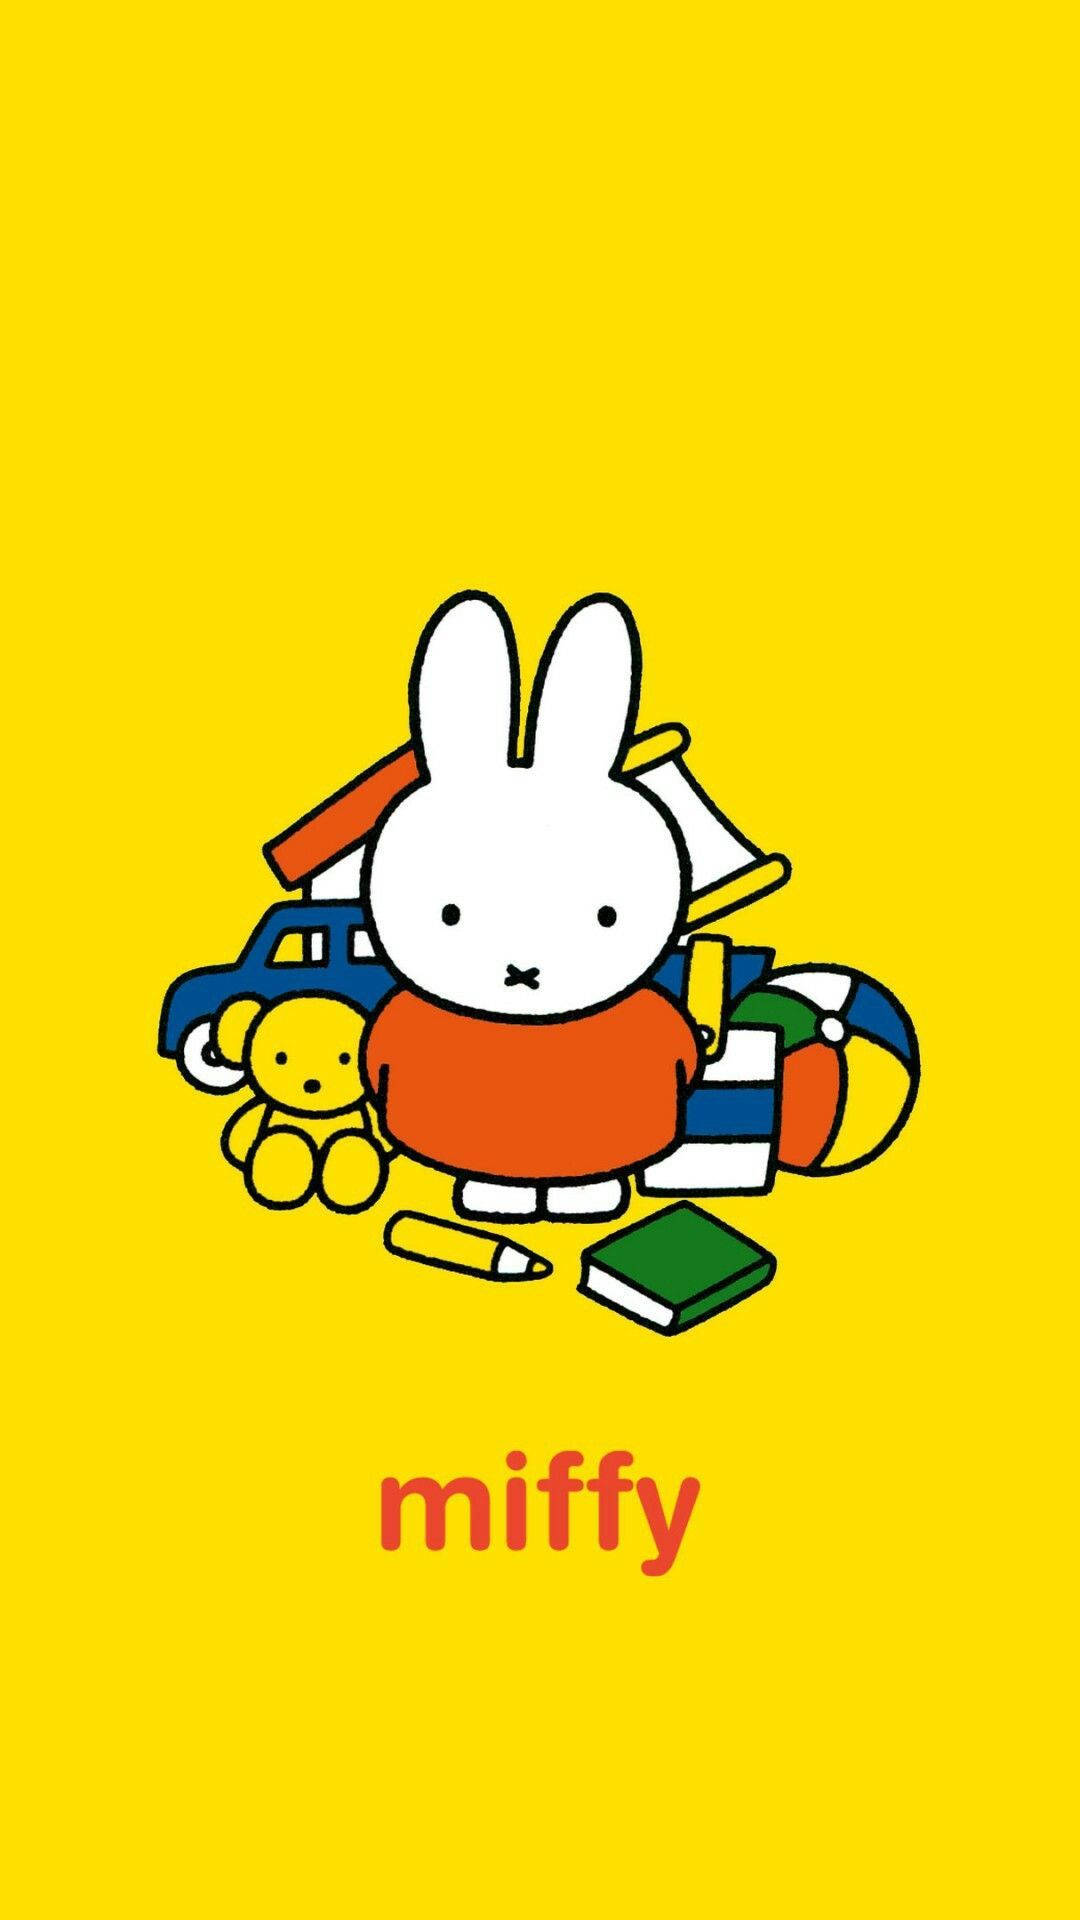 Miffy Toys Play Date